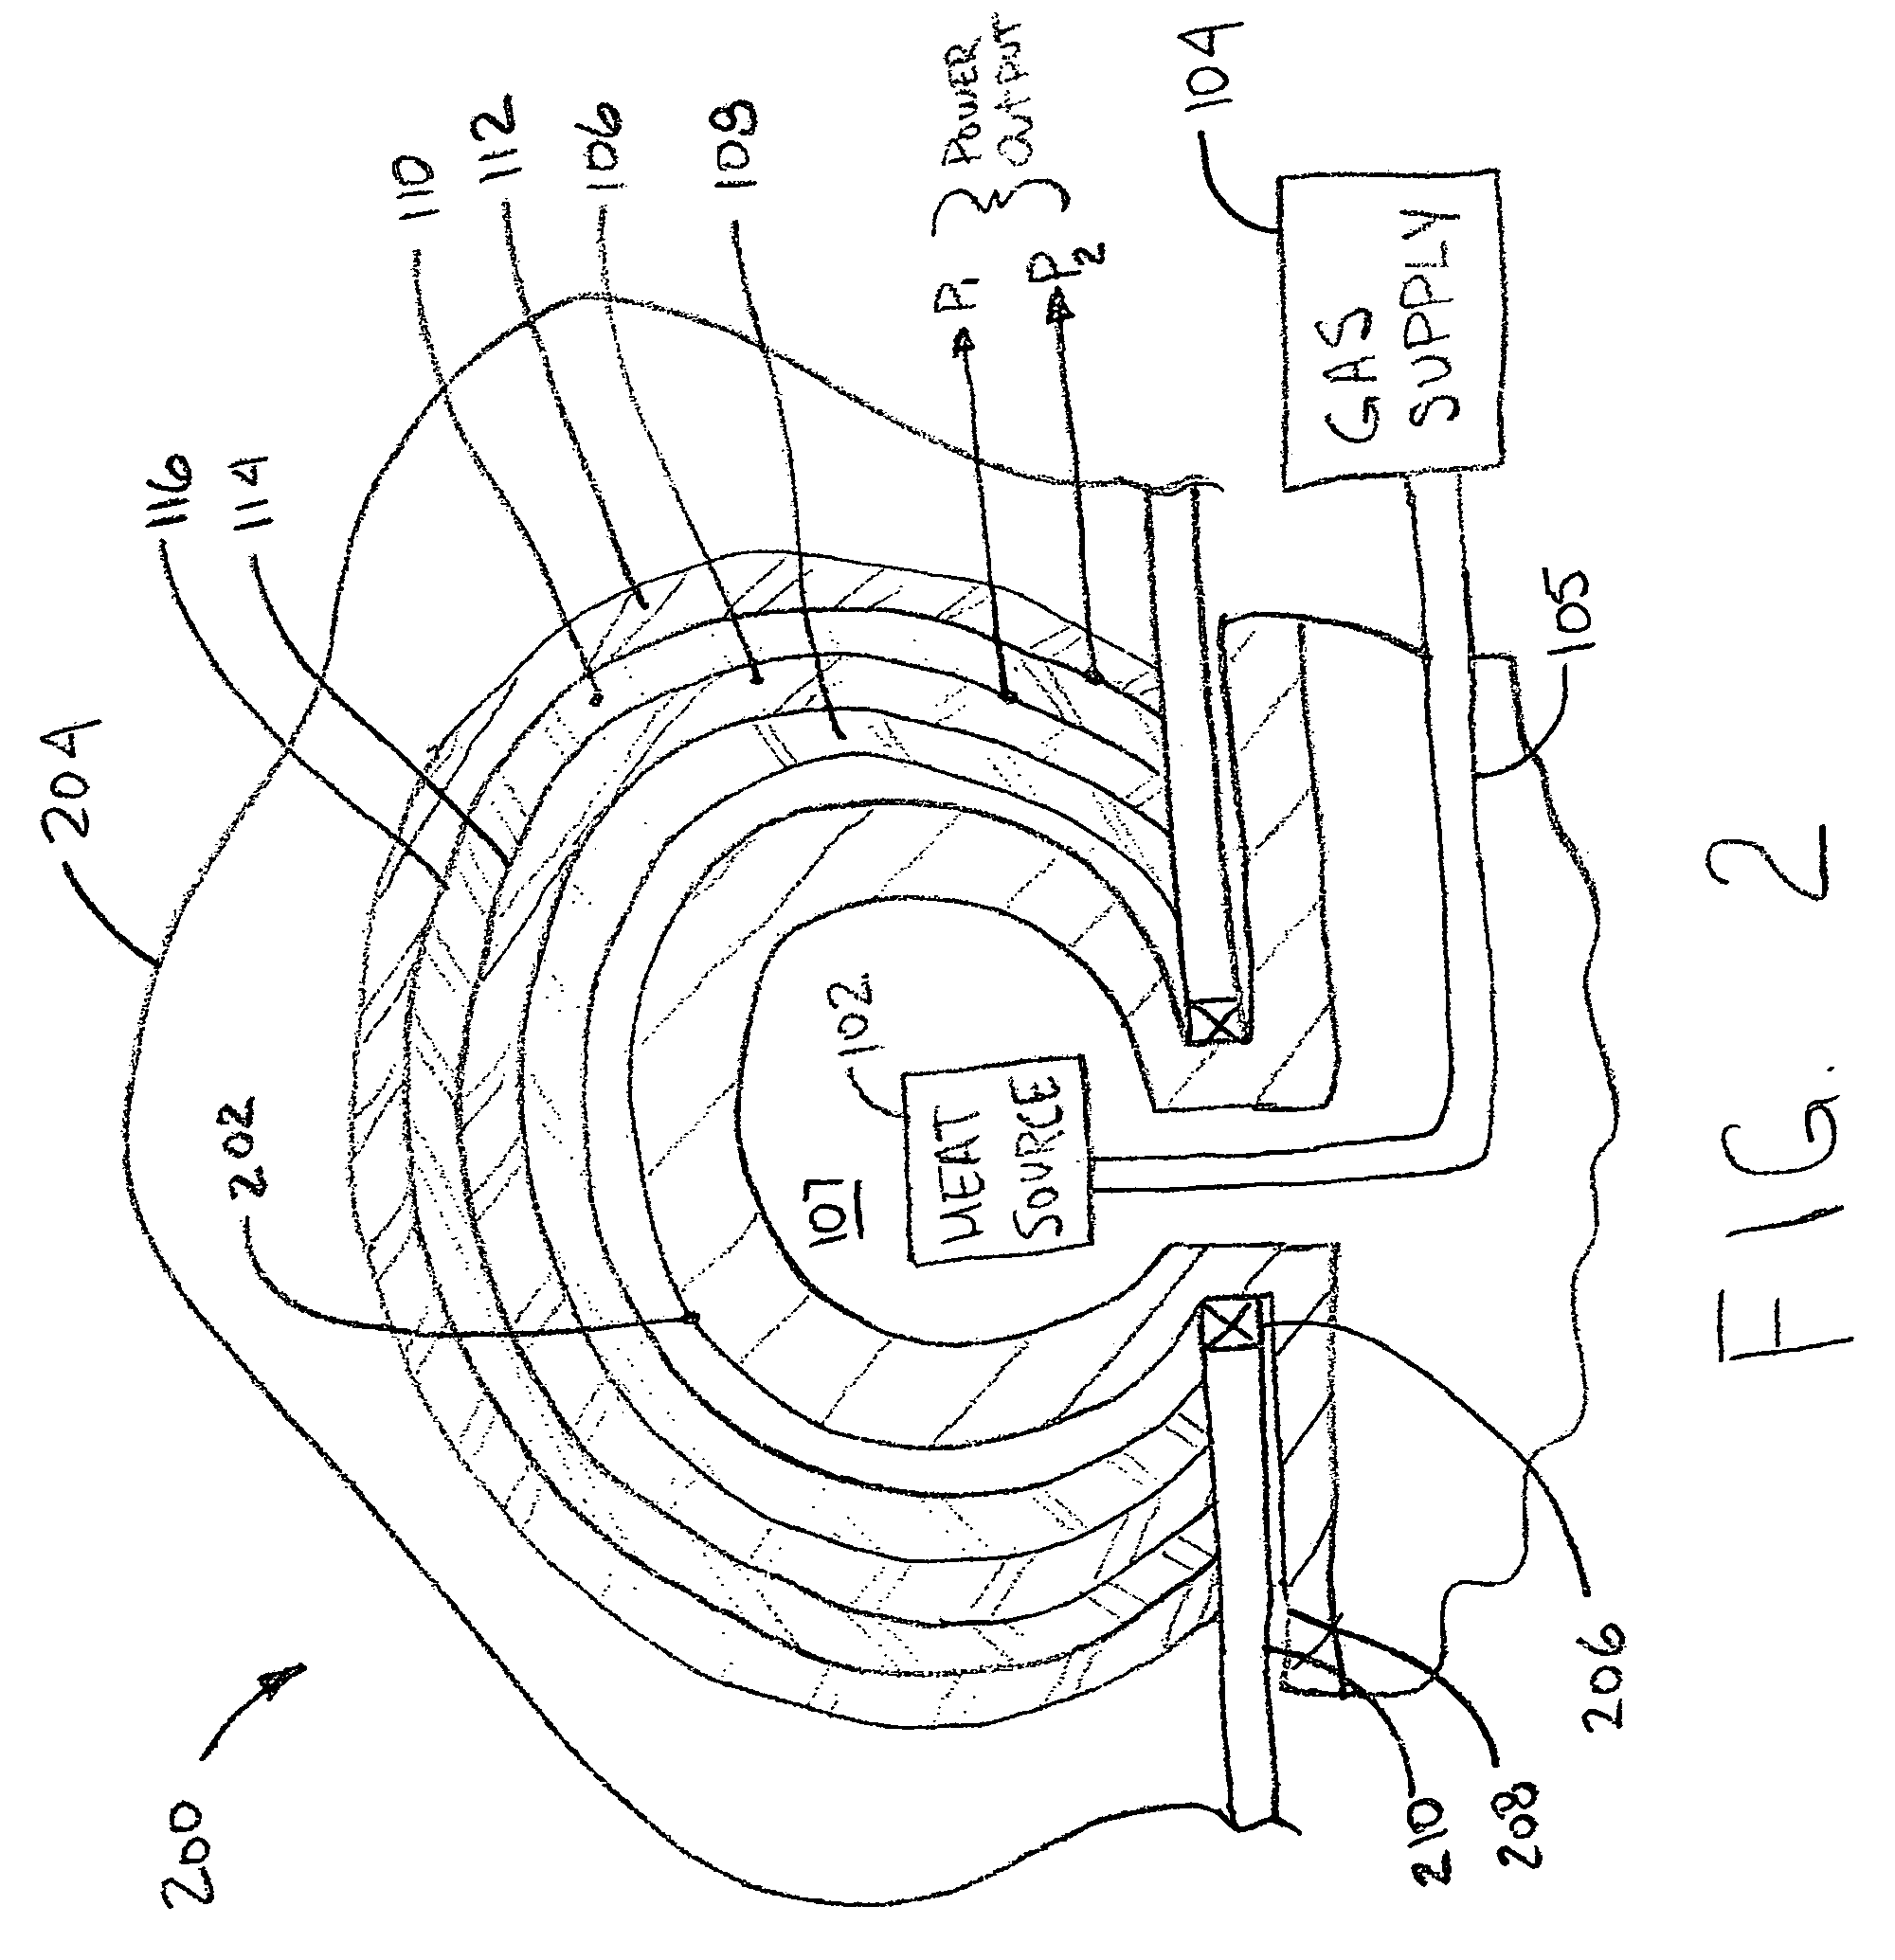 Method and devices for generating energy from photovoltaics and temperature differentials